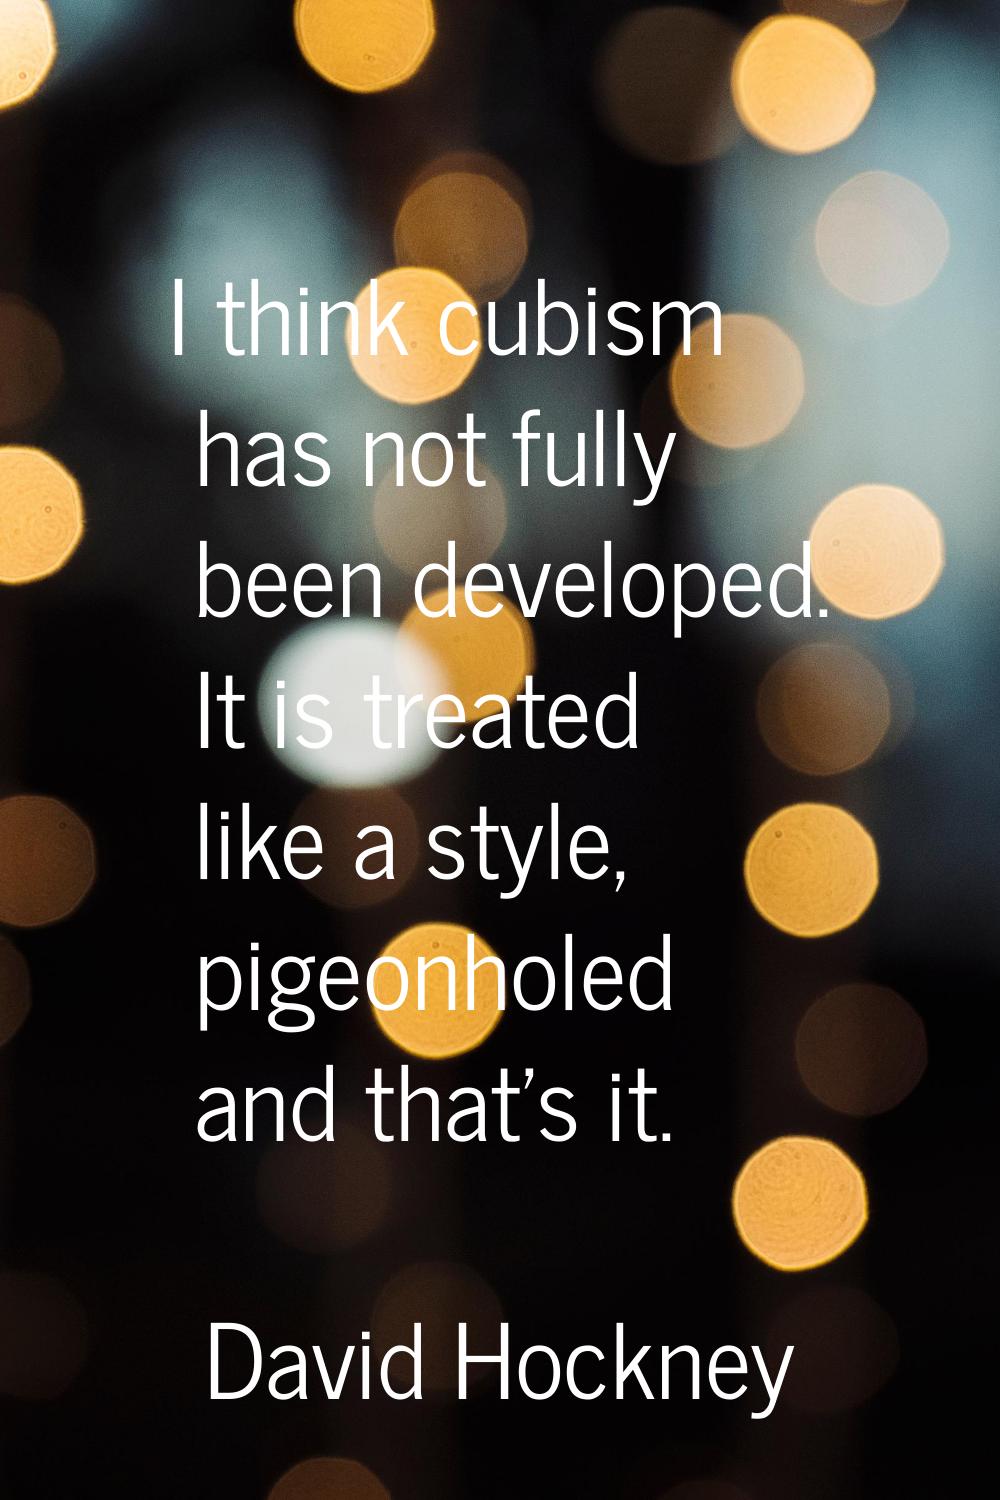 I think cubism has not fully been developed. It is treated like a style, pigeonholed and that's it.